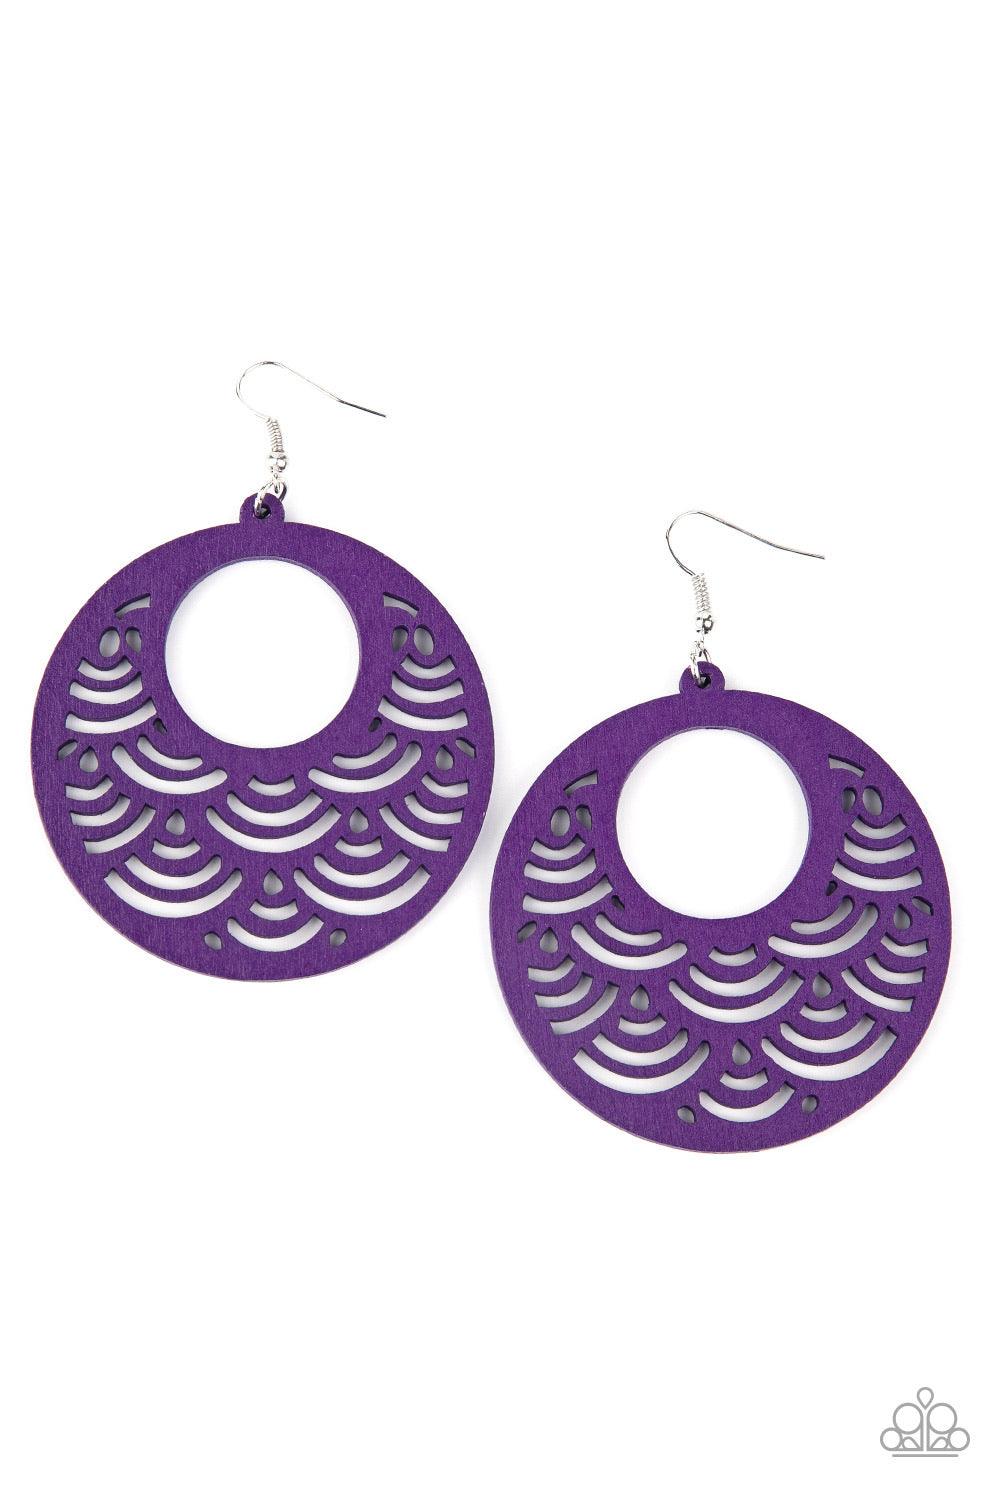 Paparazzi Accessories SEA Le Vie - Purple Stenciled in an airy scalloped cutout pattern, a vivacious purple wooden frame swings from the ear for a colorful tropical inspiration. Earring attaches to a standard fishhook fitting. Sold as one pair of earrings